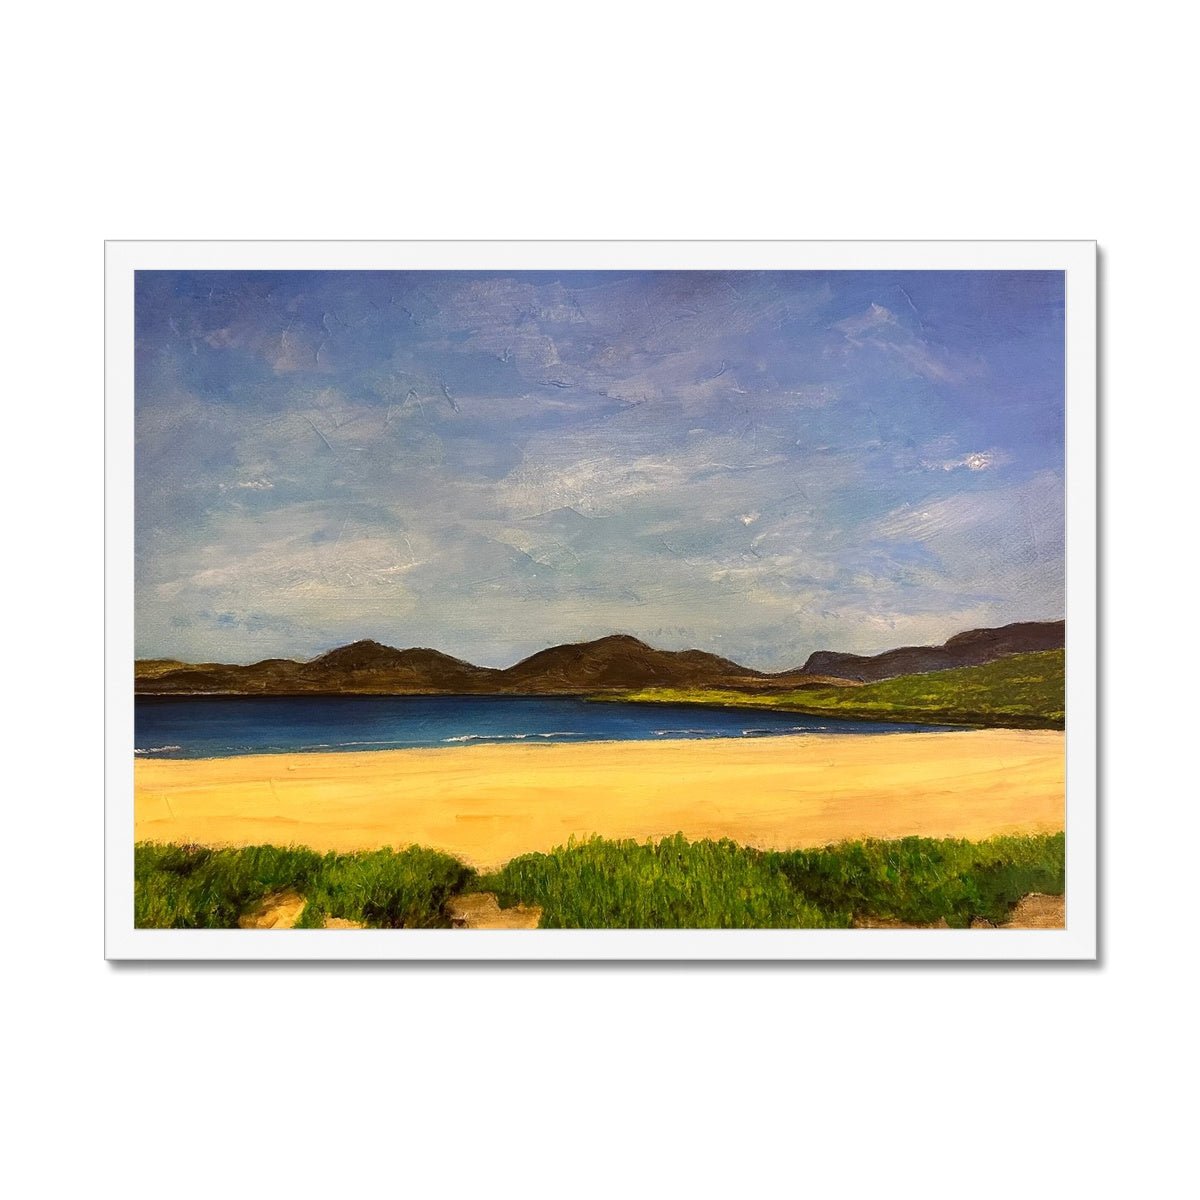 Luskentyre Beach Harris Painting | Framed Prints From Scotland-Framed Prints-Hebridean Islands Art Gallery-A2 Landscape-White Frame-Paintings, Prints, Homeware, Art Gifts From Scotland By Scottish Artist Kevin Hunter